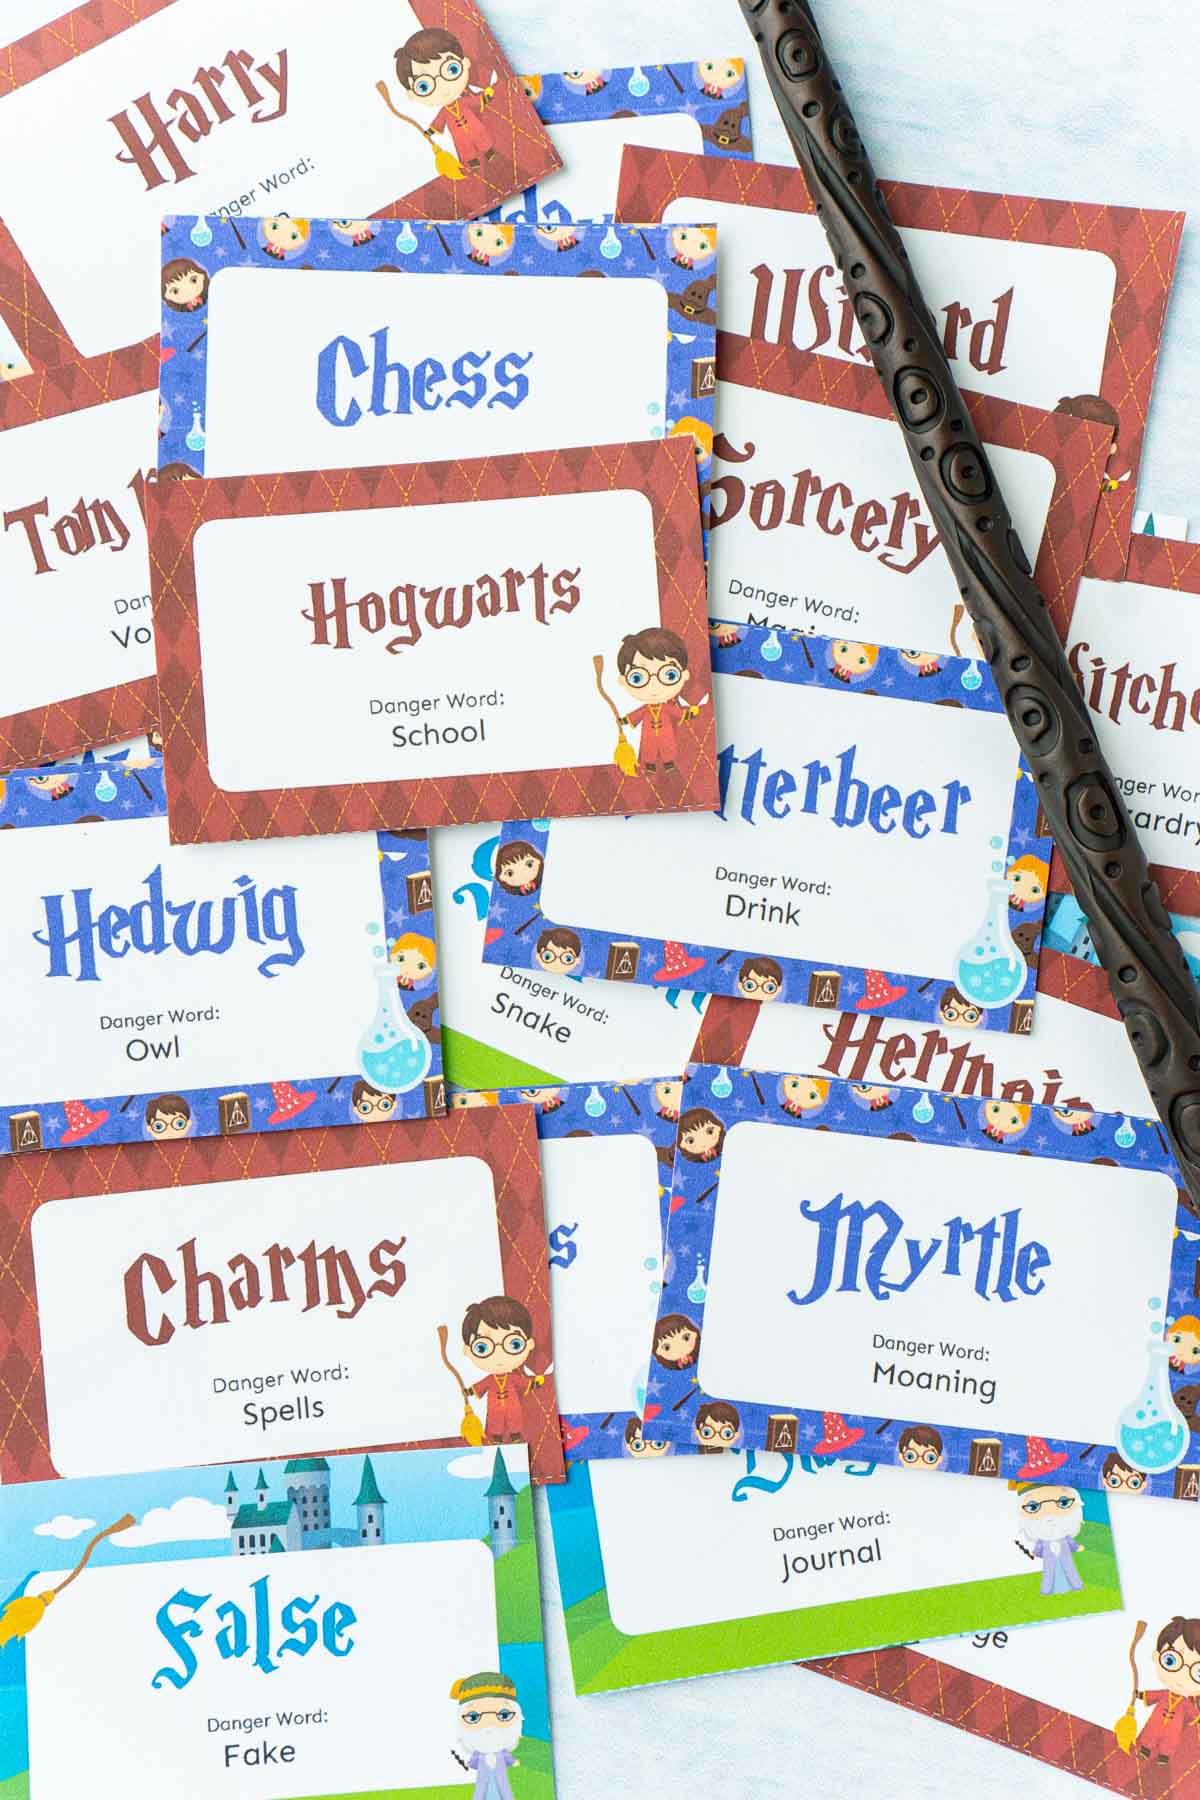 Harry Potter Charms Cards Game